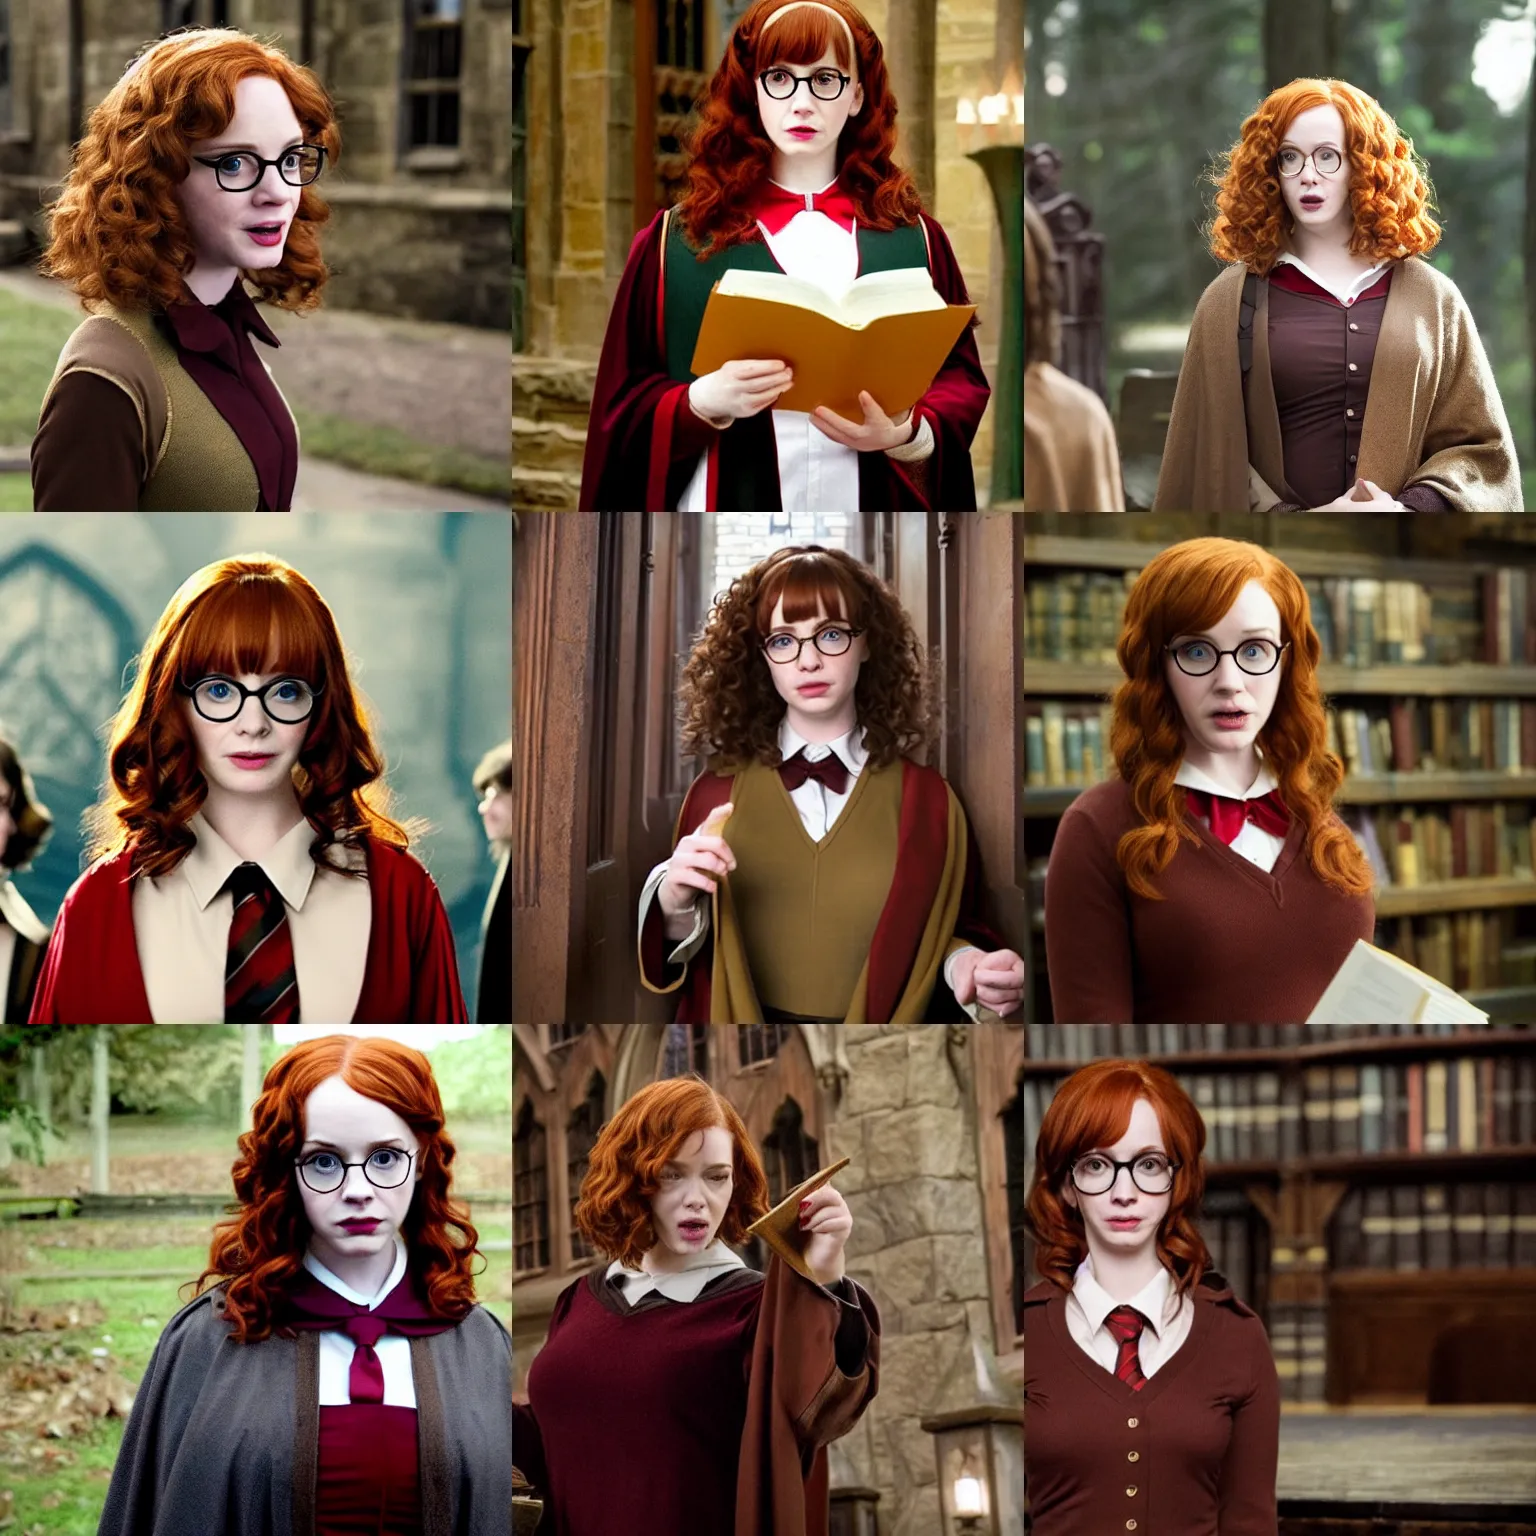 Prompt: a beautiful surprised shocked christina hendricks dressed as a hogwarts student, hogwarts uniform with brown hair and round glasses, harry potter film still from the movie directed by denis villeneuve, wide shot